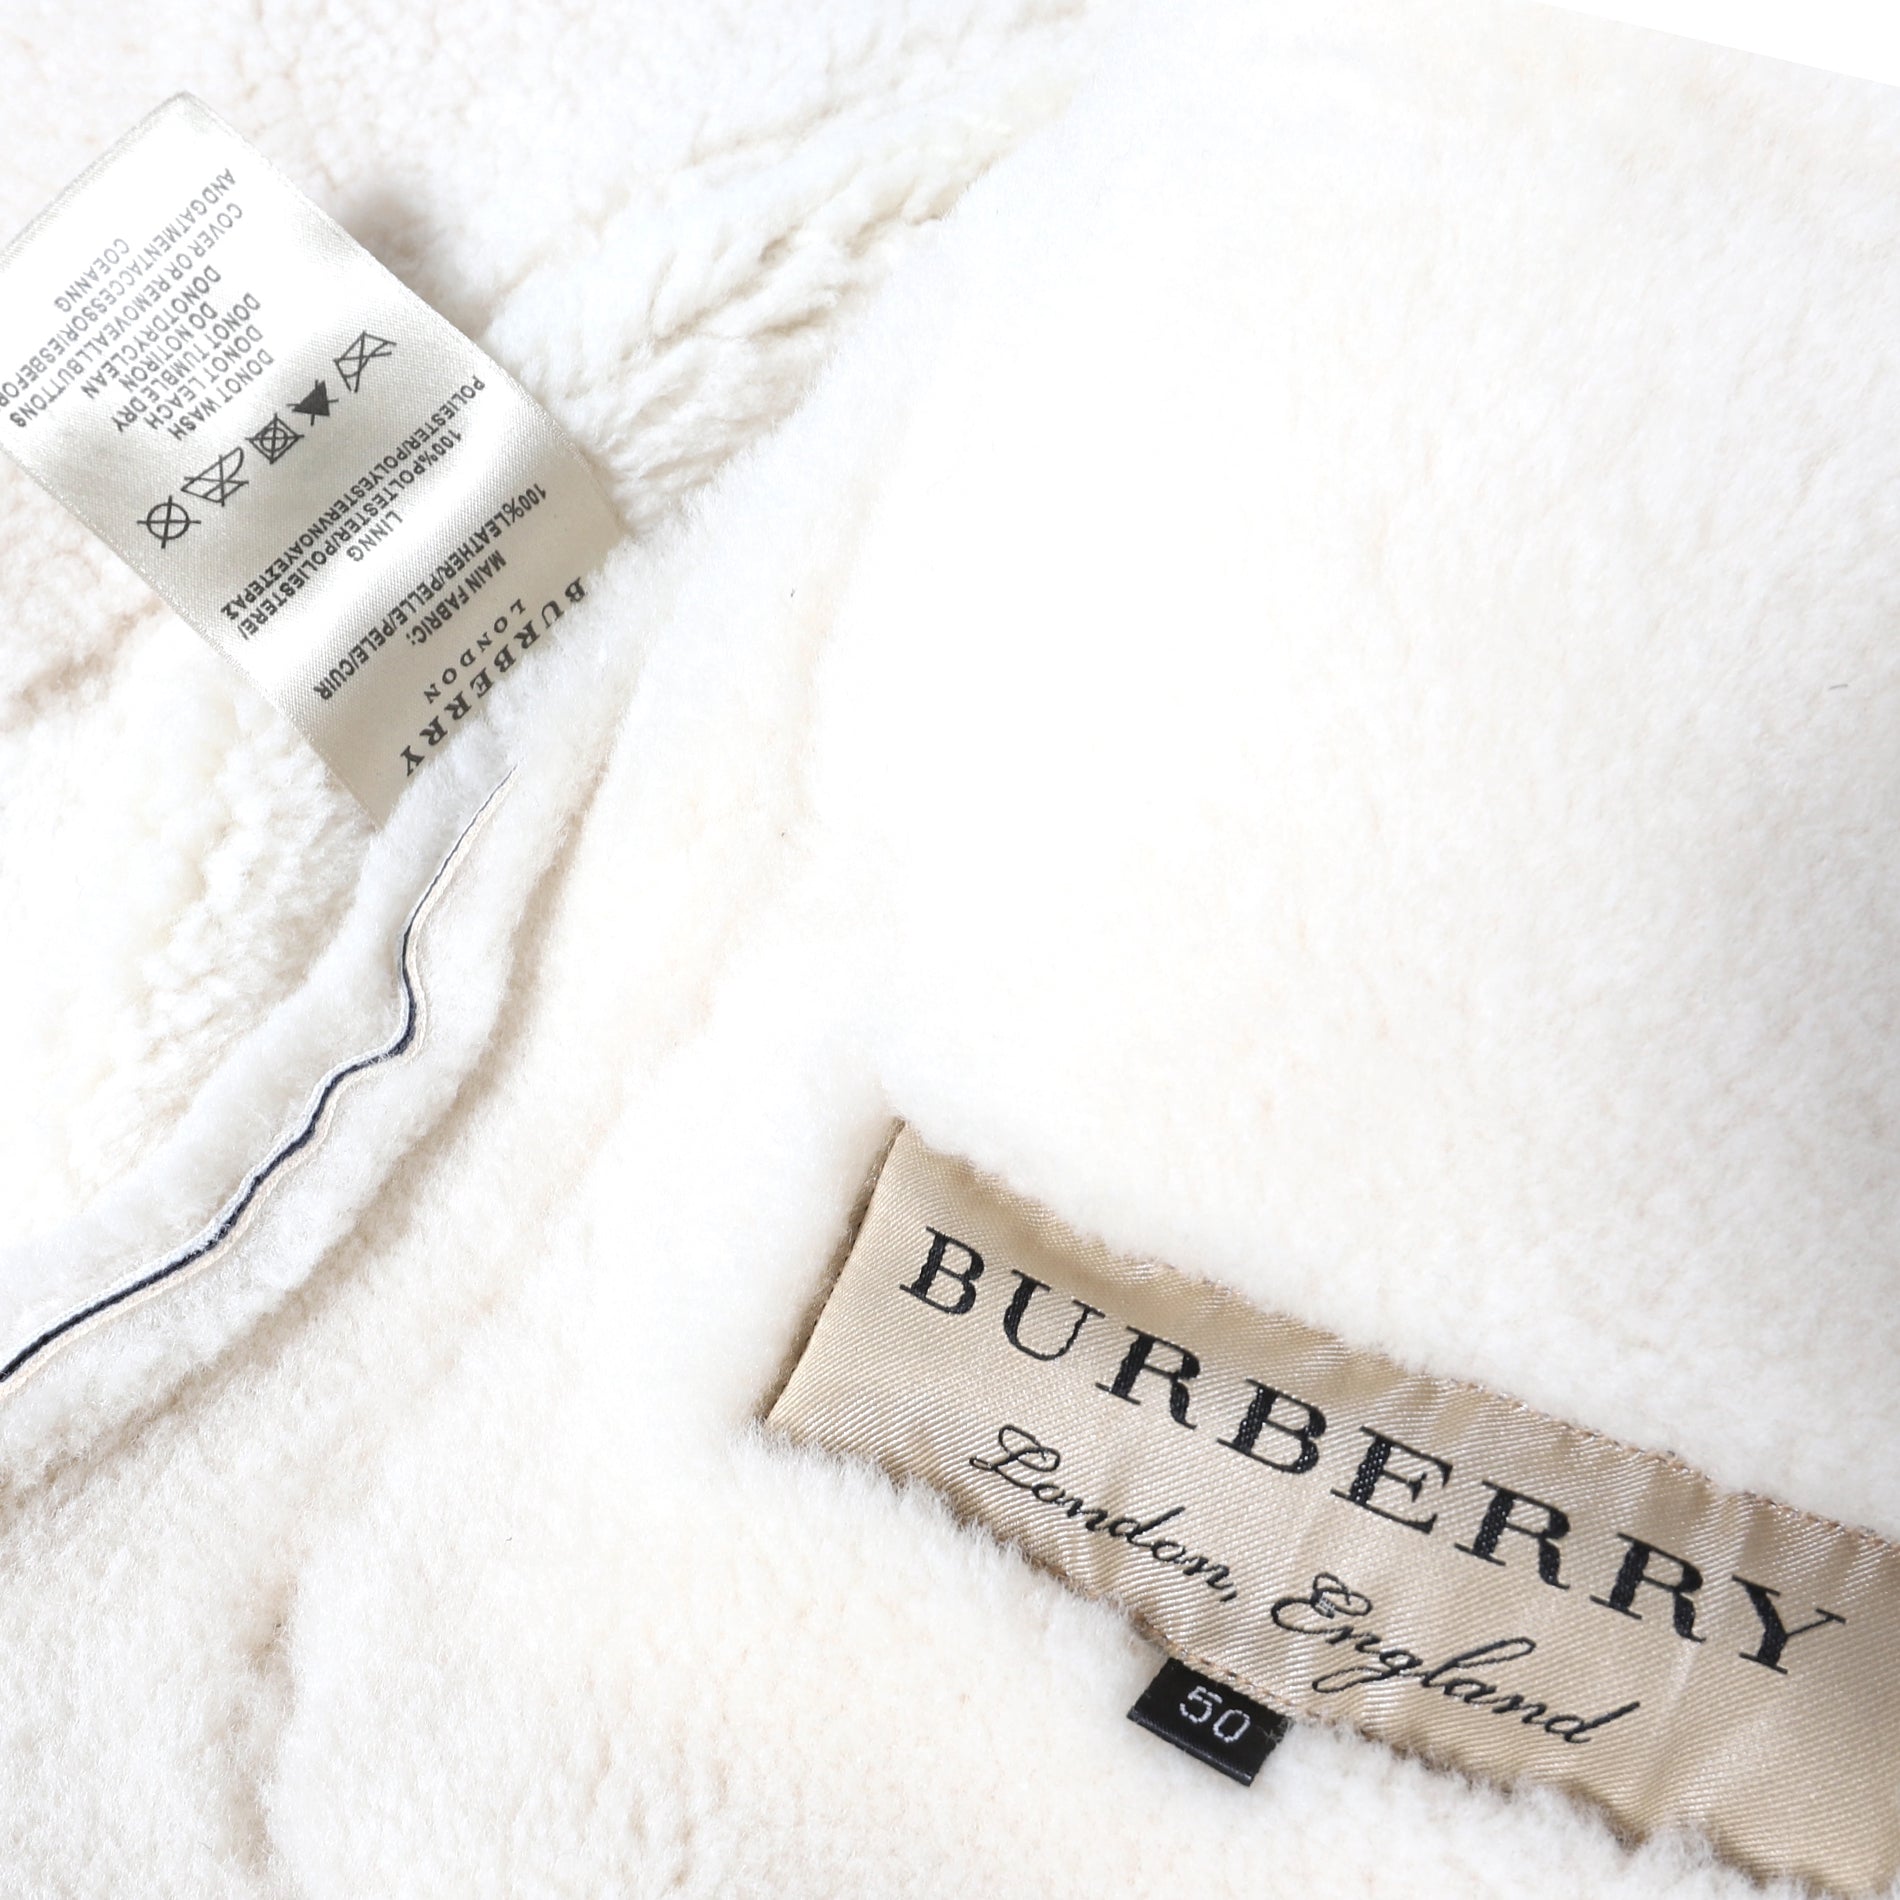 Burberry Shearling Aviator Leather Jacket